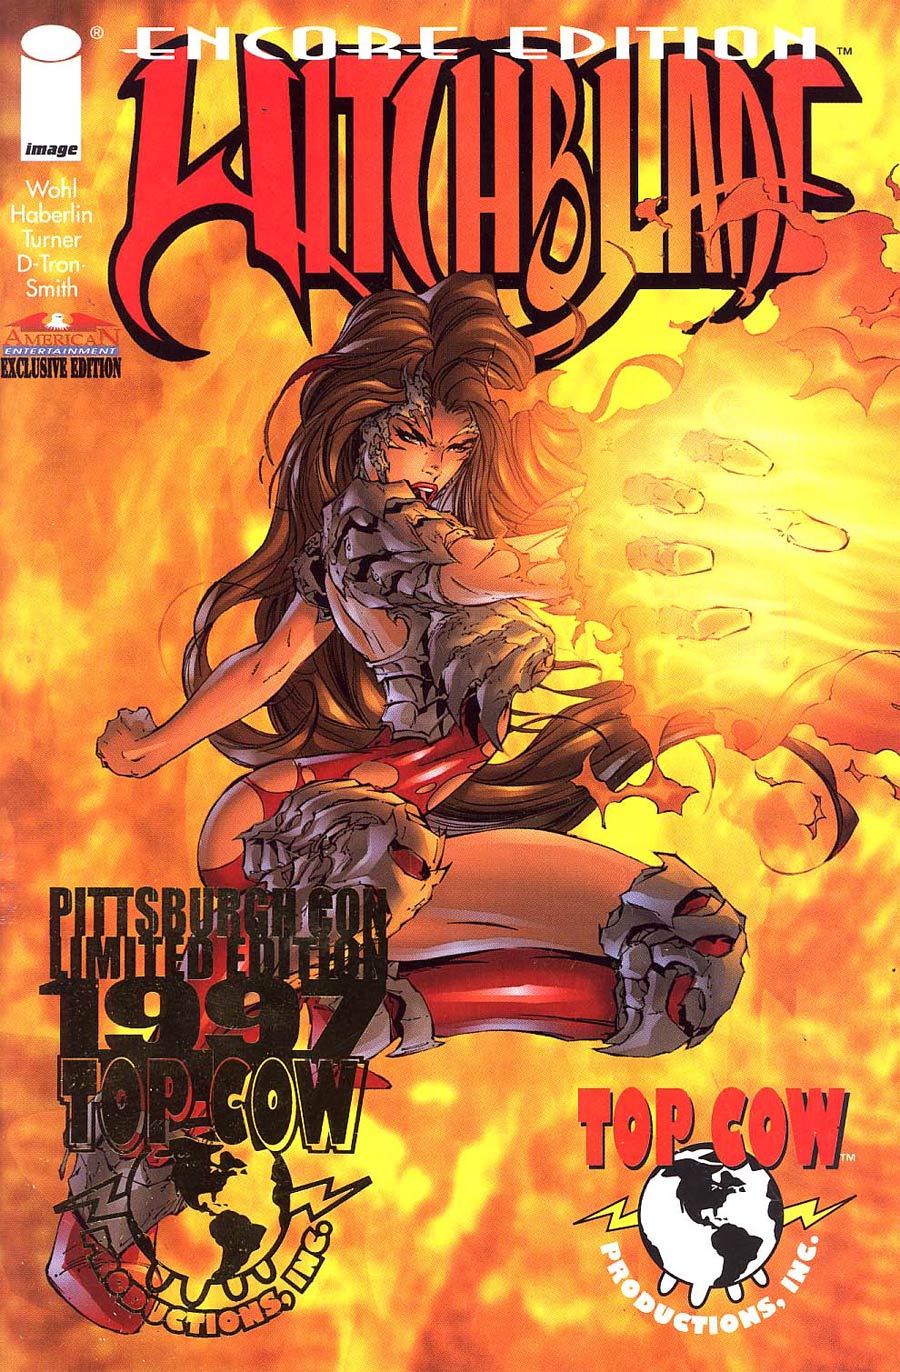 Witchblade #2 Cover C American Entertainment Encore Edition Gold Foil 1997 Pittsburgh Con